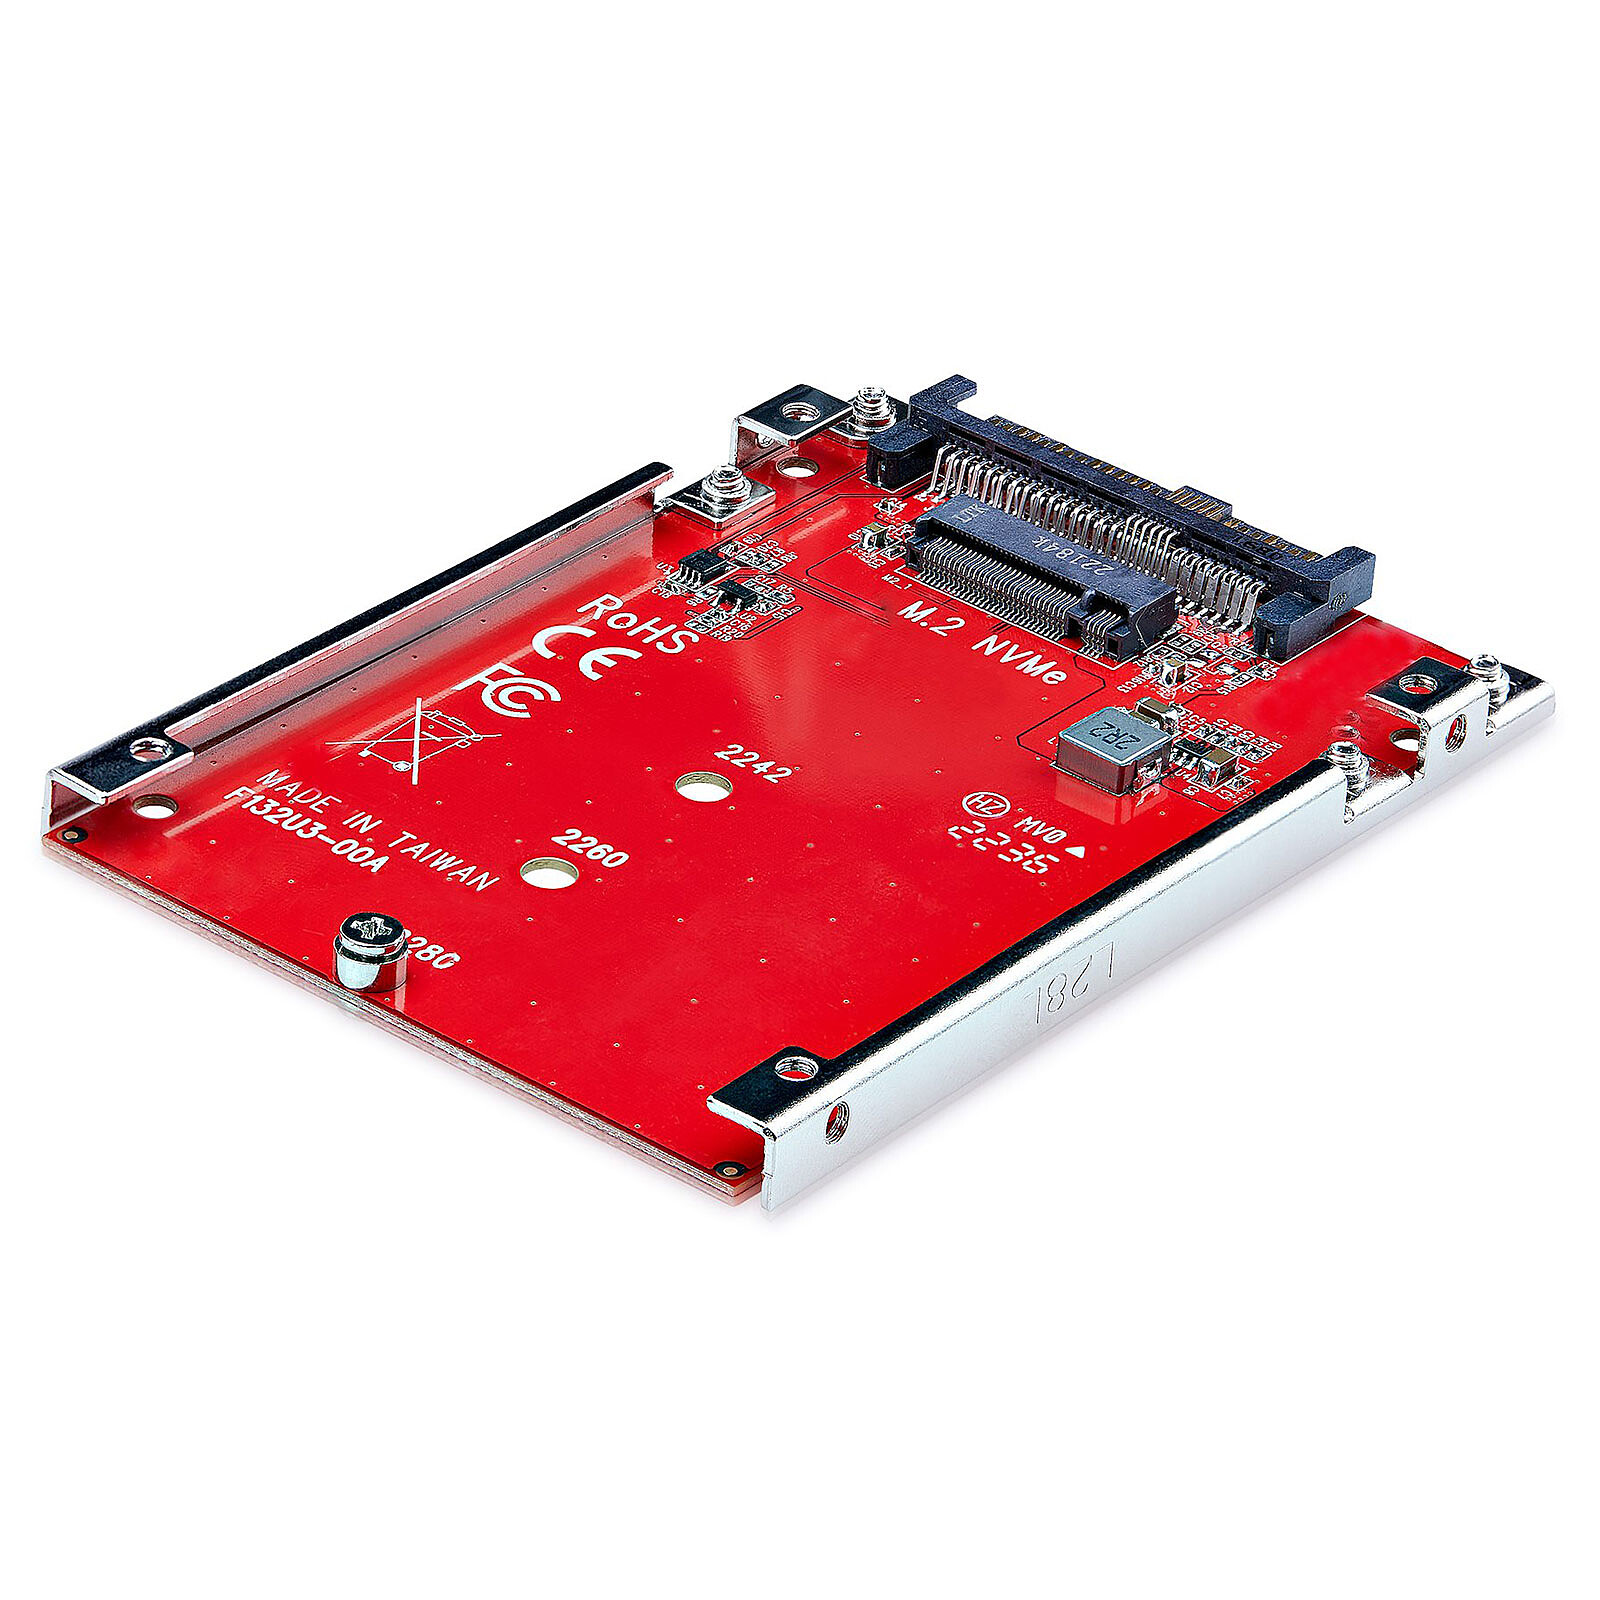 U.3 to PCIe Adapter Card For U.3 SSDs - Drive Adapters and Drive Converters, Hard Drive Accessories